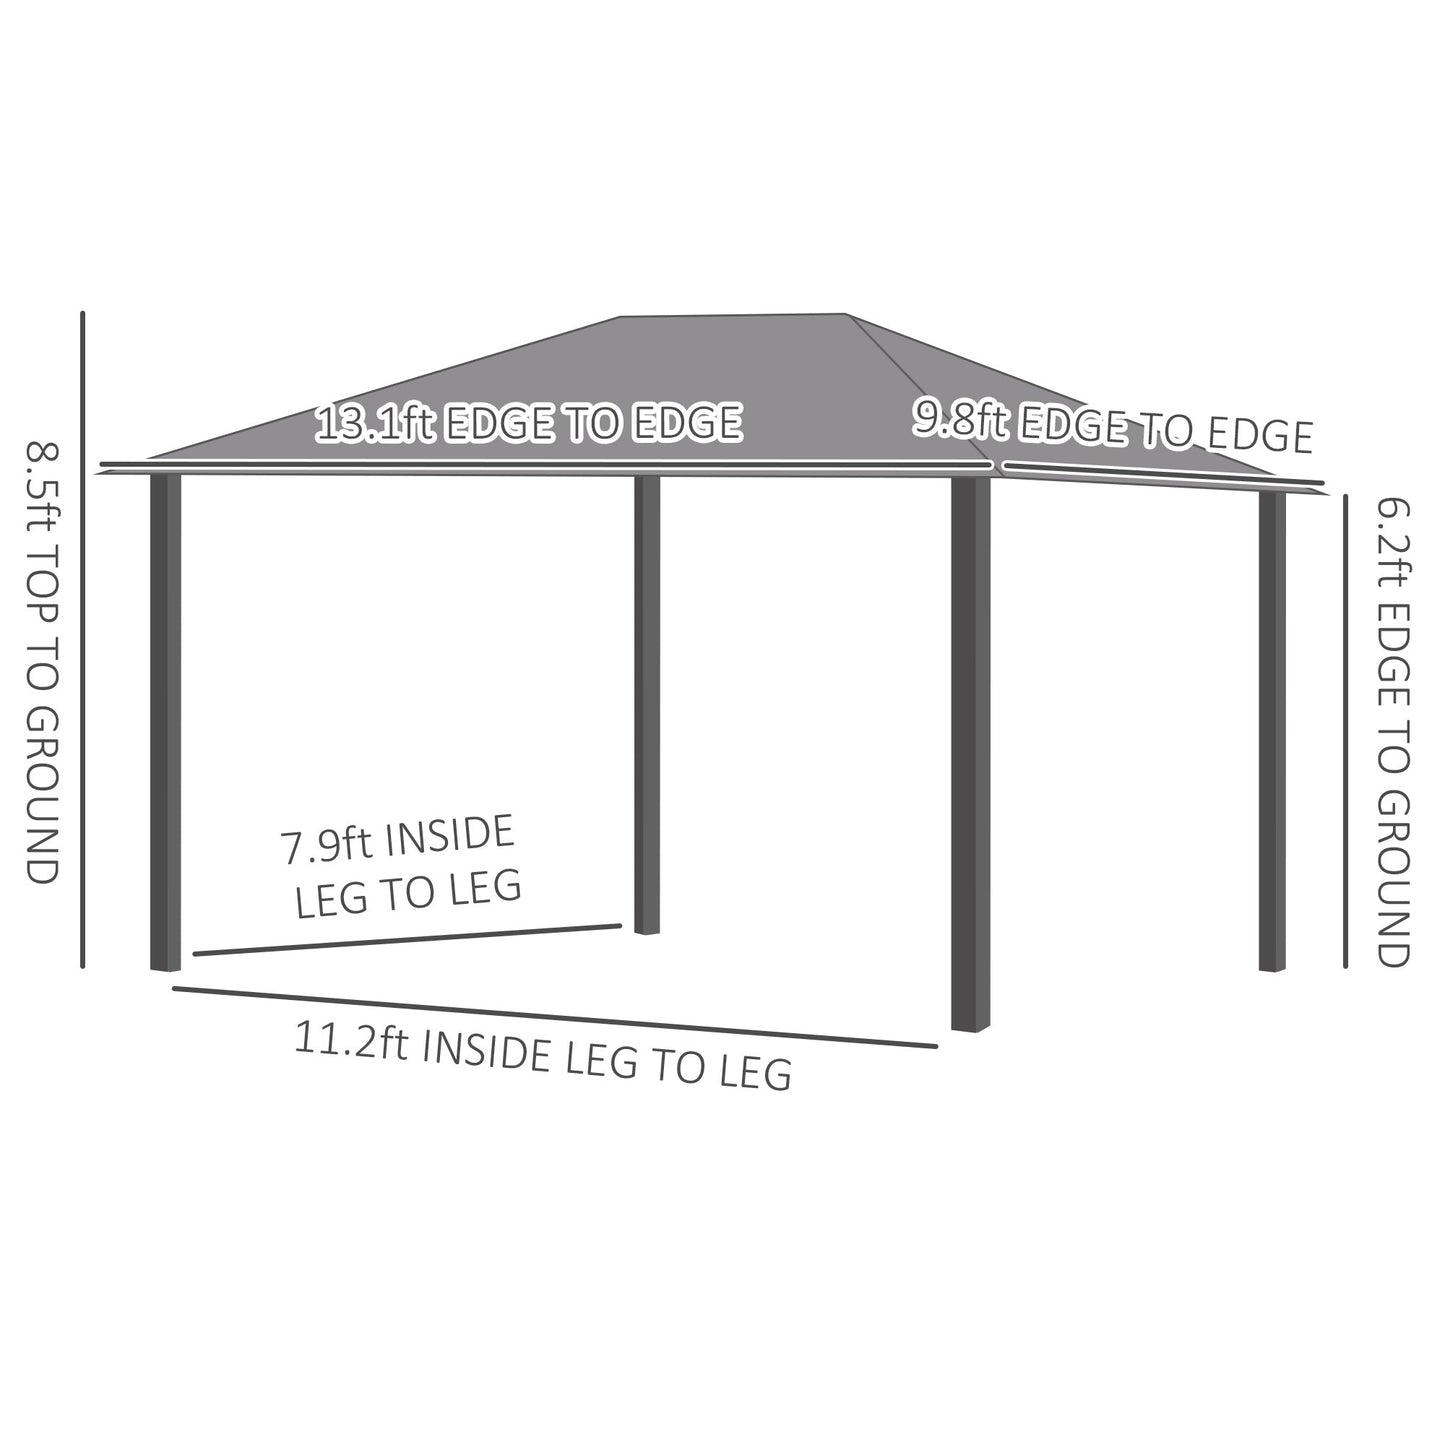 Outdoor and Garden-10' x 13' Patio Gazebo Aluminum Frame Outdoor Canopy Shelter with Sidewalls, Vented Roof for Garden, Lawn, Backyard and Deck, Grey - Outdoor Style Company